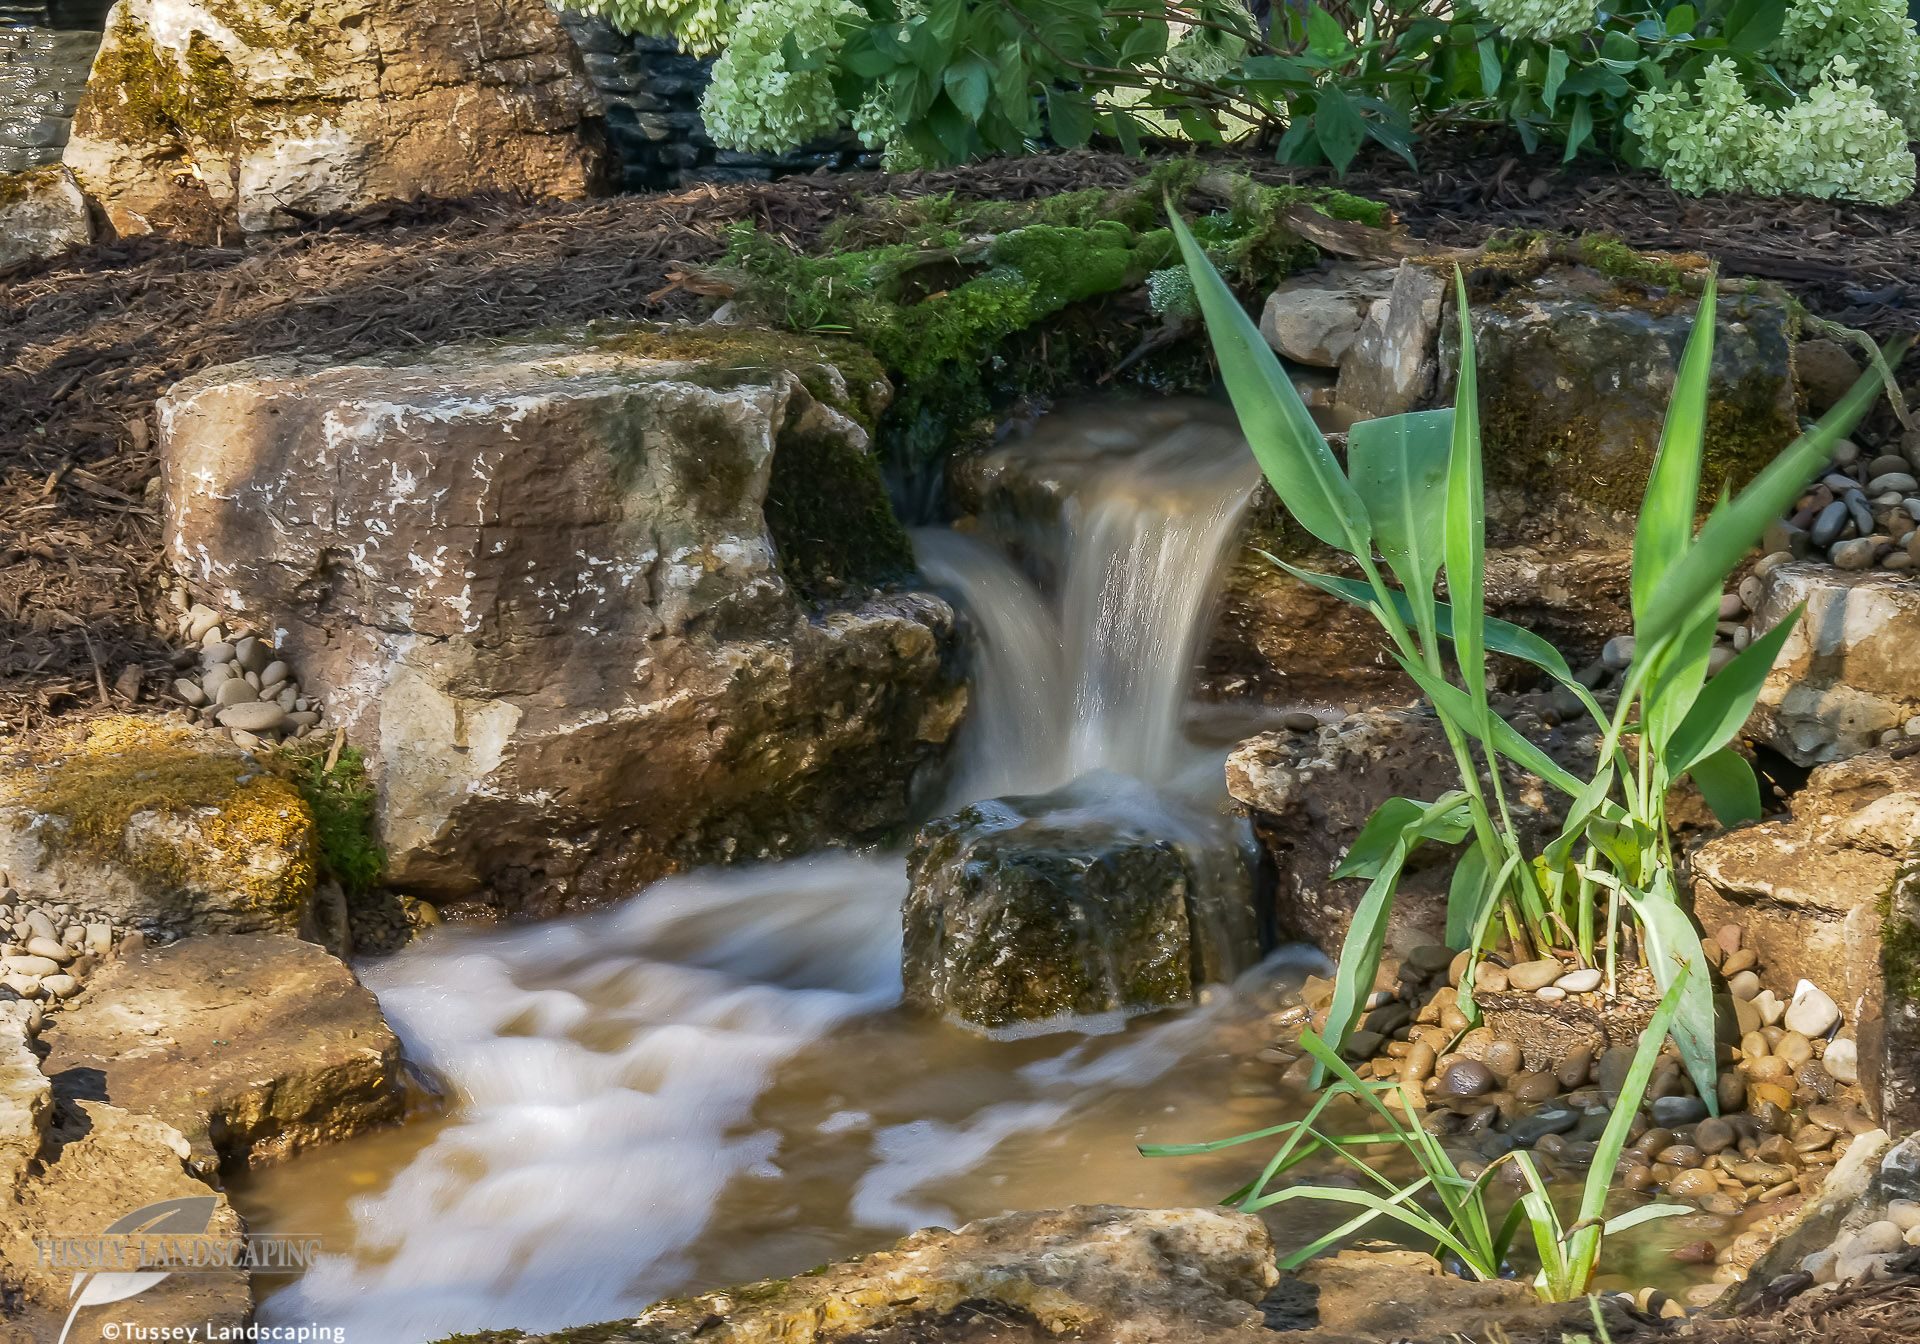 A small waterfall in a garden with rocks and plants.